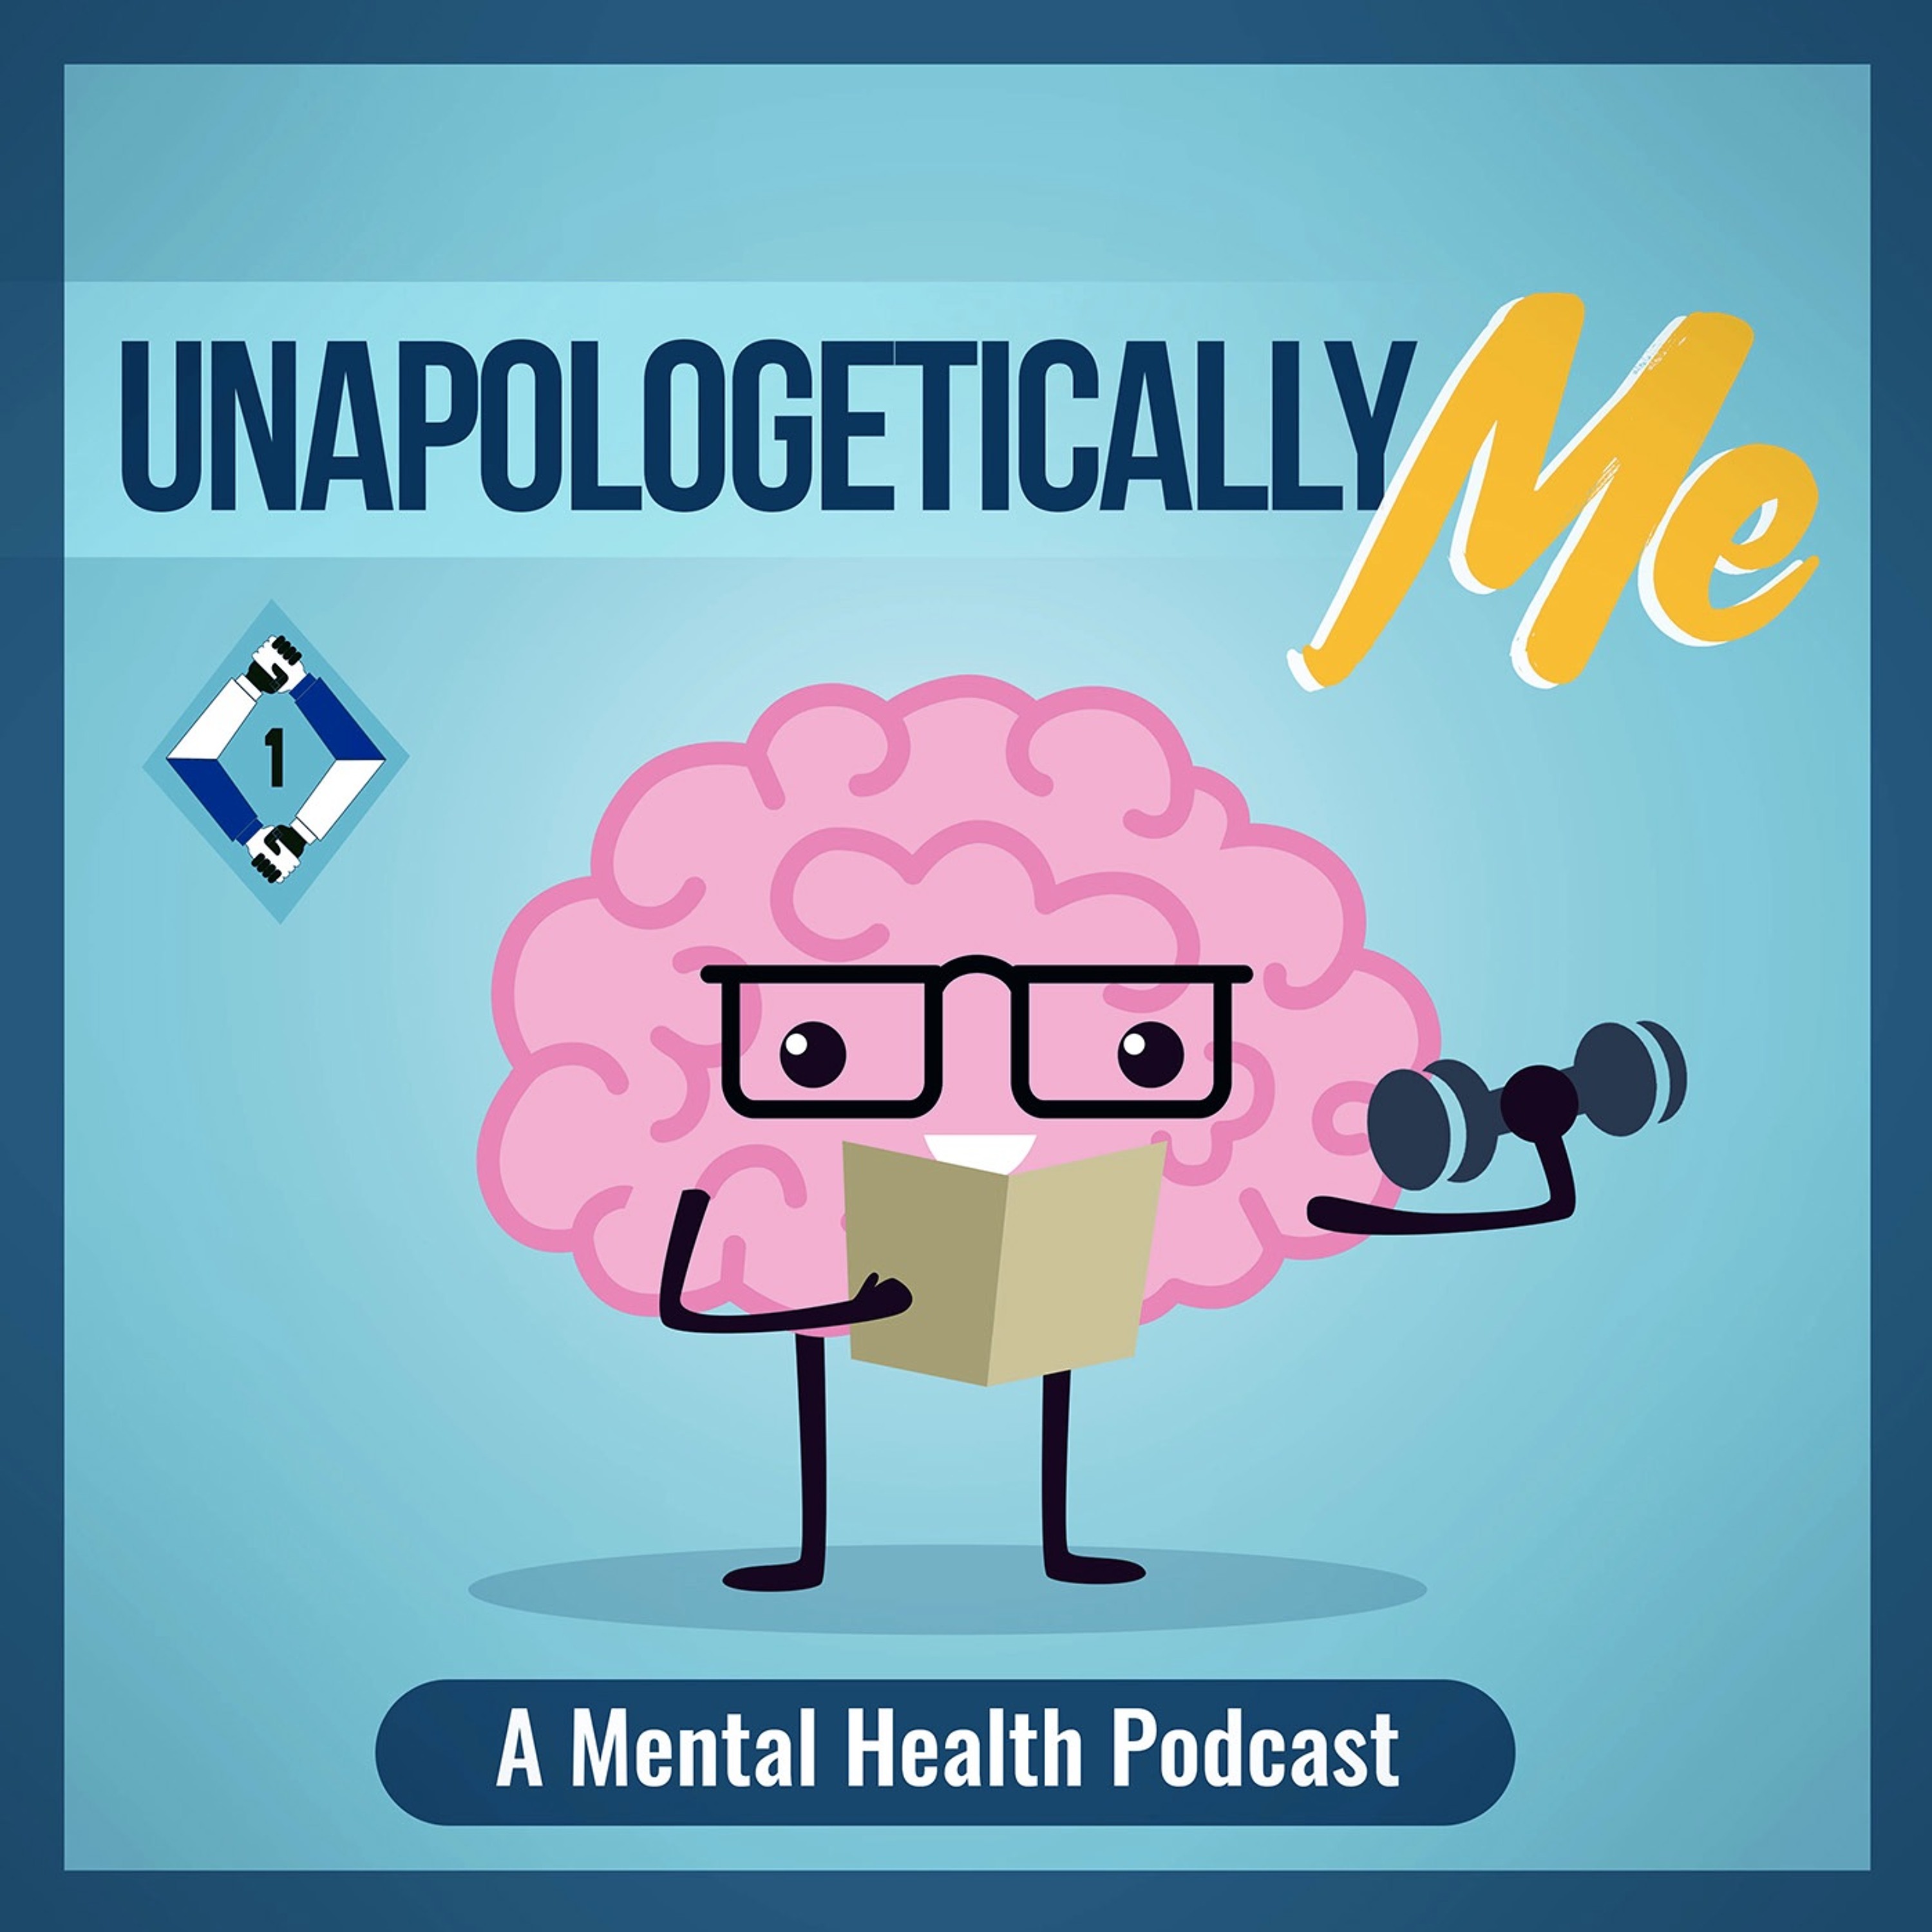 Unapologetically Me: A Mental Health Podcast - Trauma Therapy